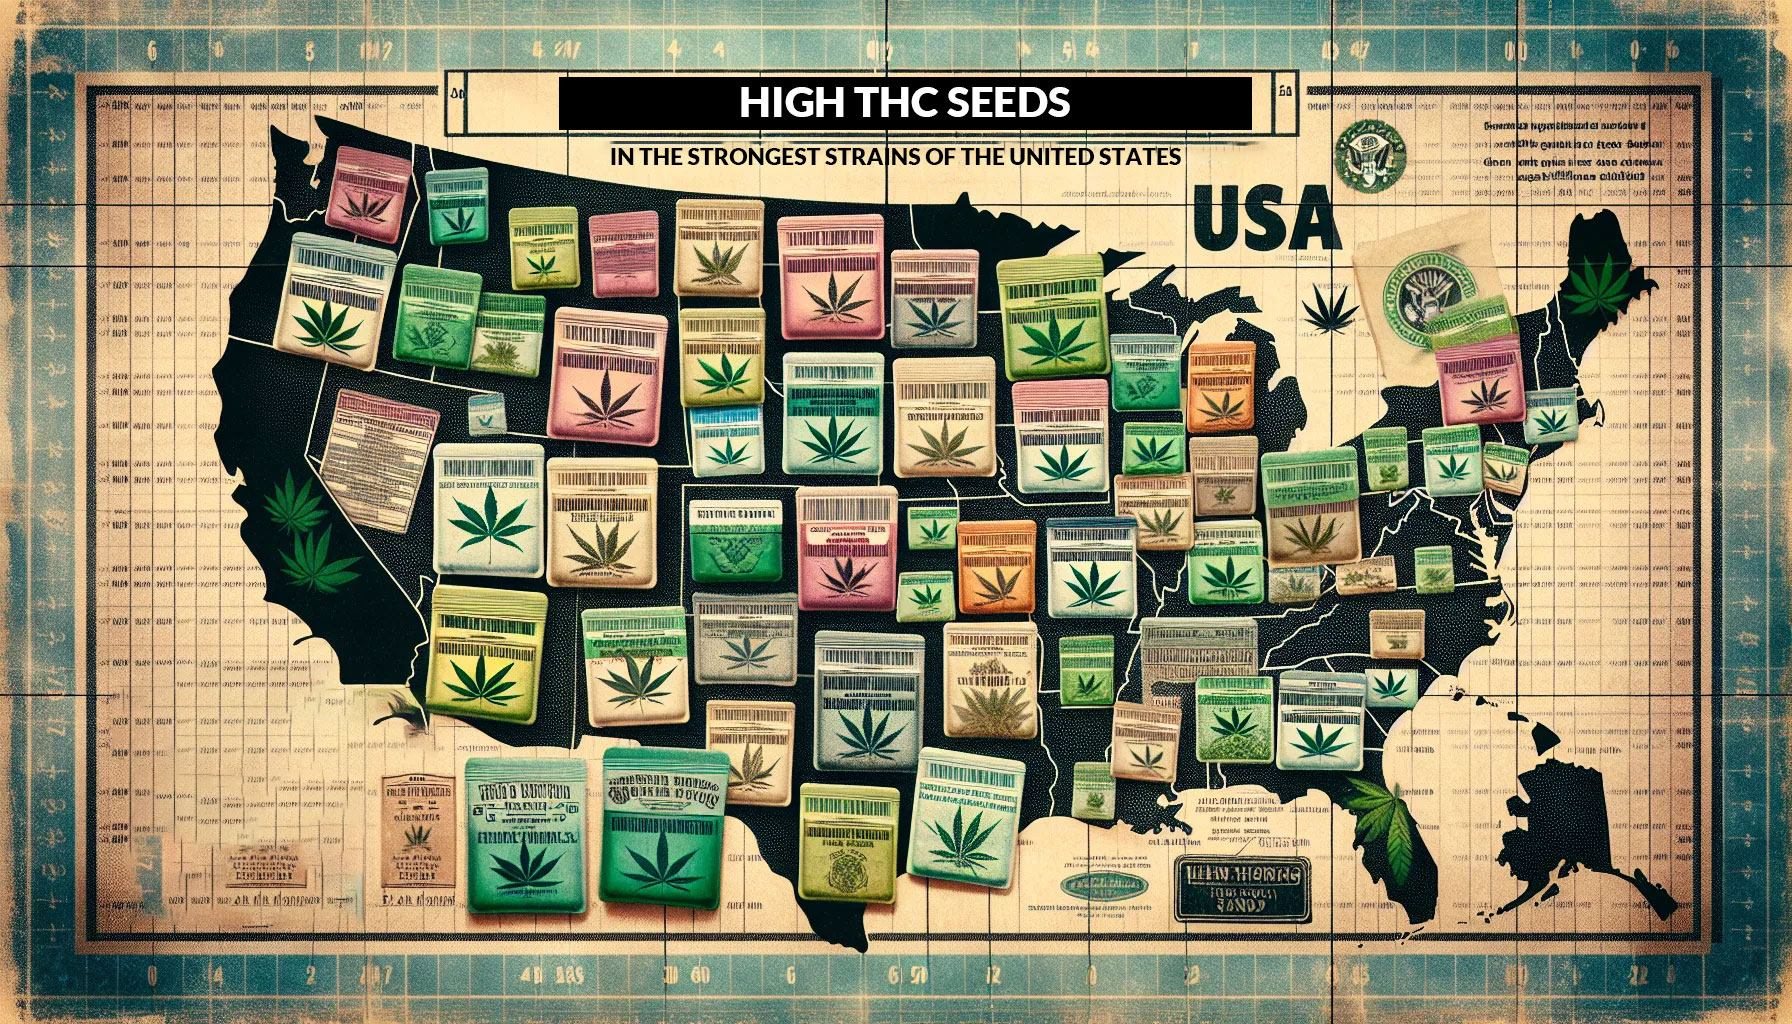 Buy High THC Seeds USA - Strongest Weed Strains - The Johnny Seeds Bank